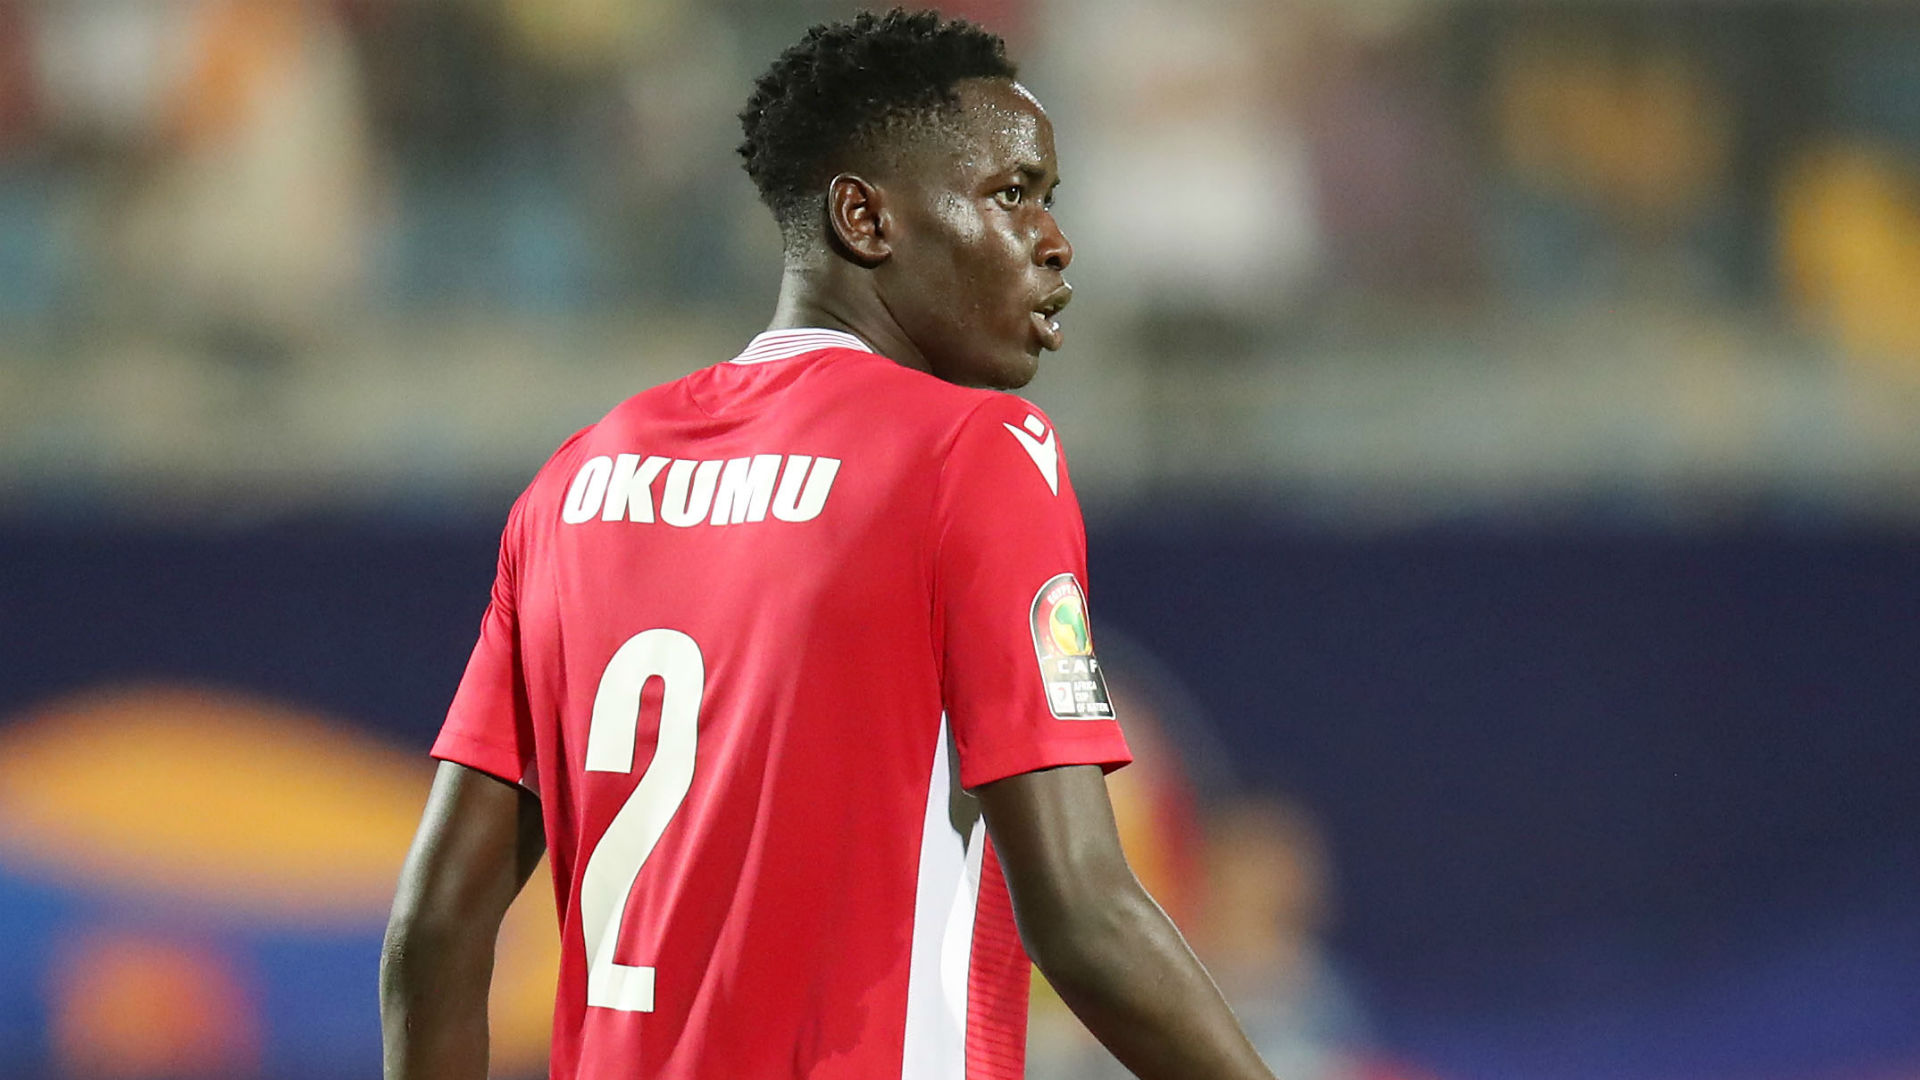 Okumu's move to KAA Gent shows nothing is impossible - Lusaka Dynamos' Otieno